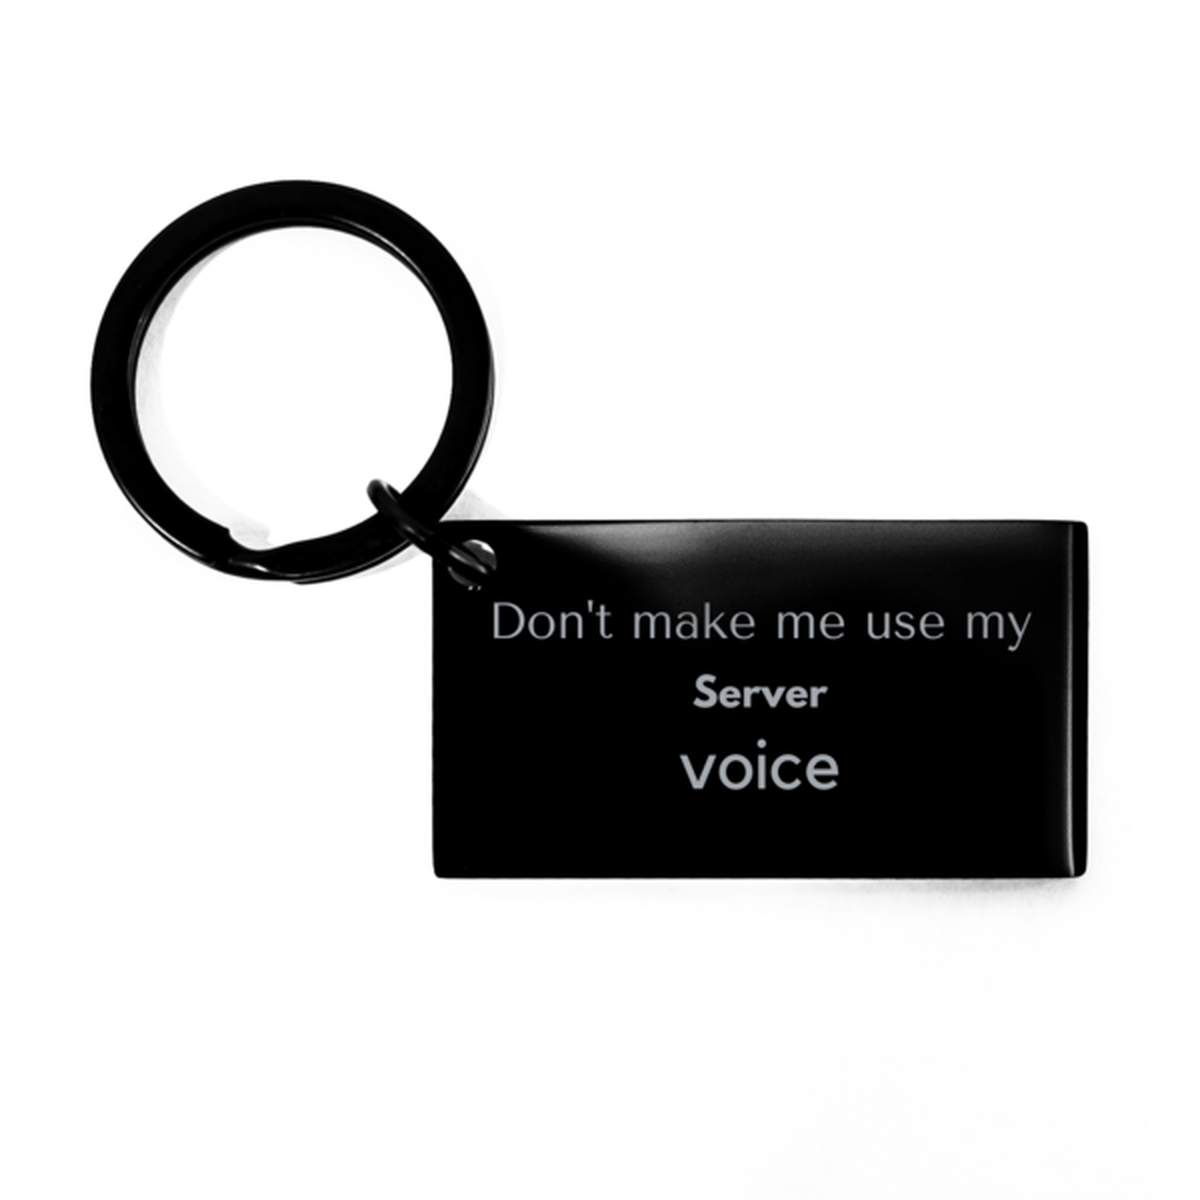 Don't make me use my Server voice, Sarcasm Server Gifts, Christmas Server Keychain Birthday Unique Gifts For Server Coworkers, Men, Women, Colleague, Friends